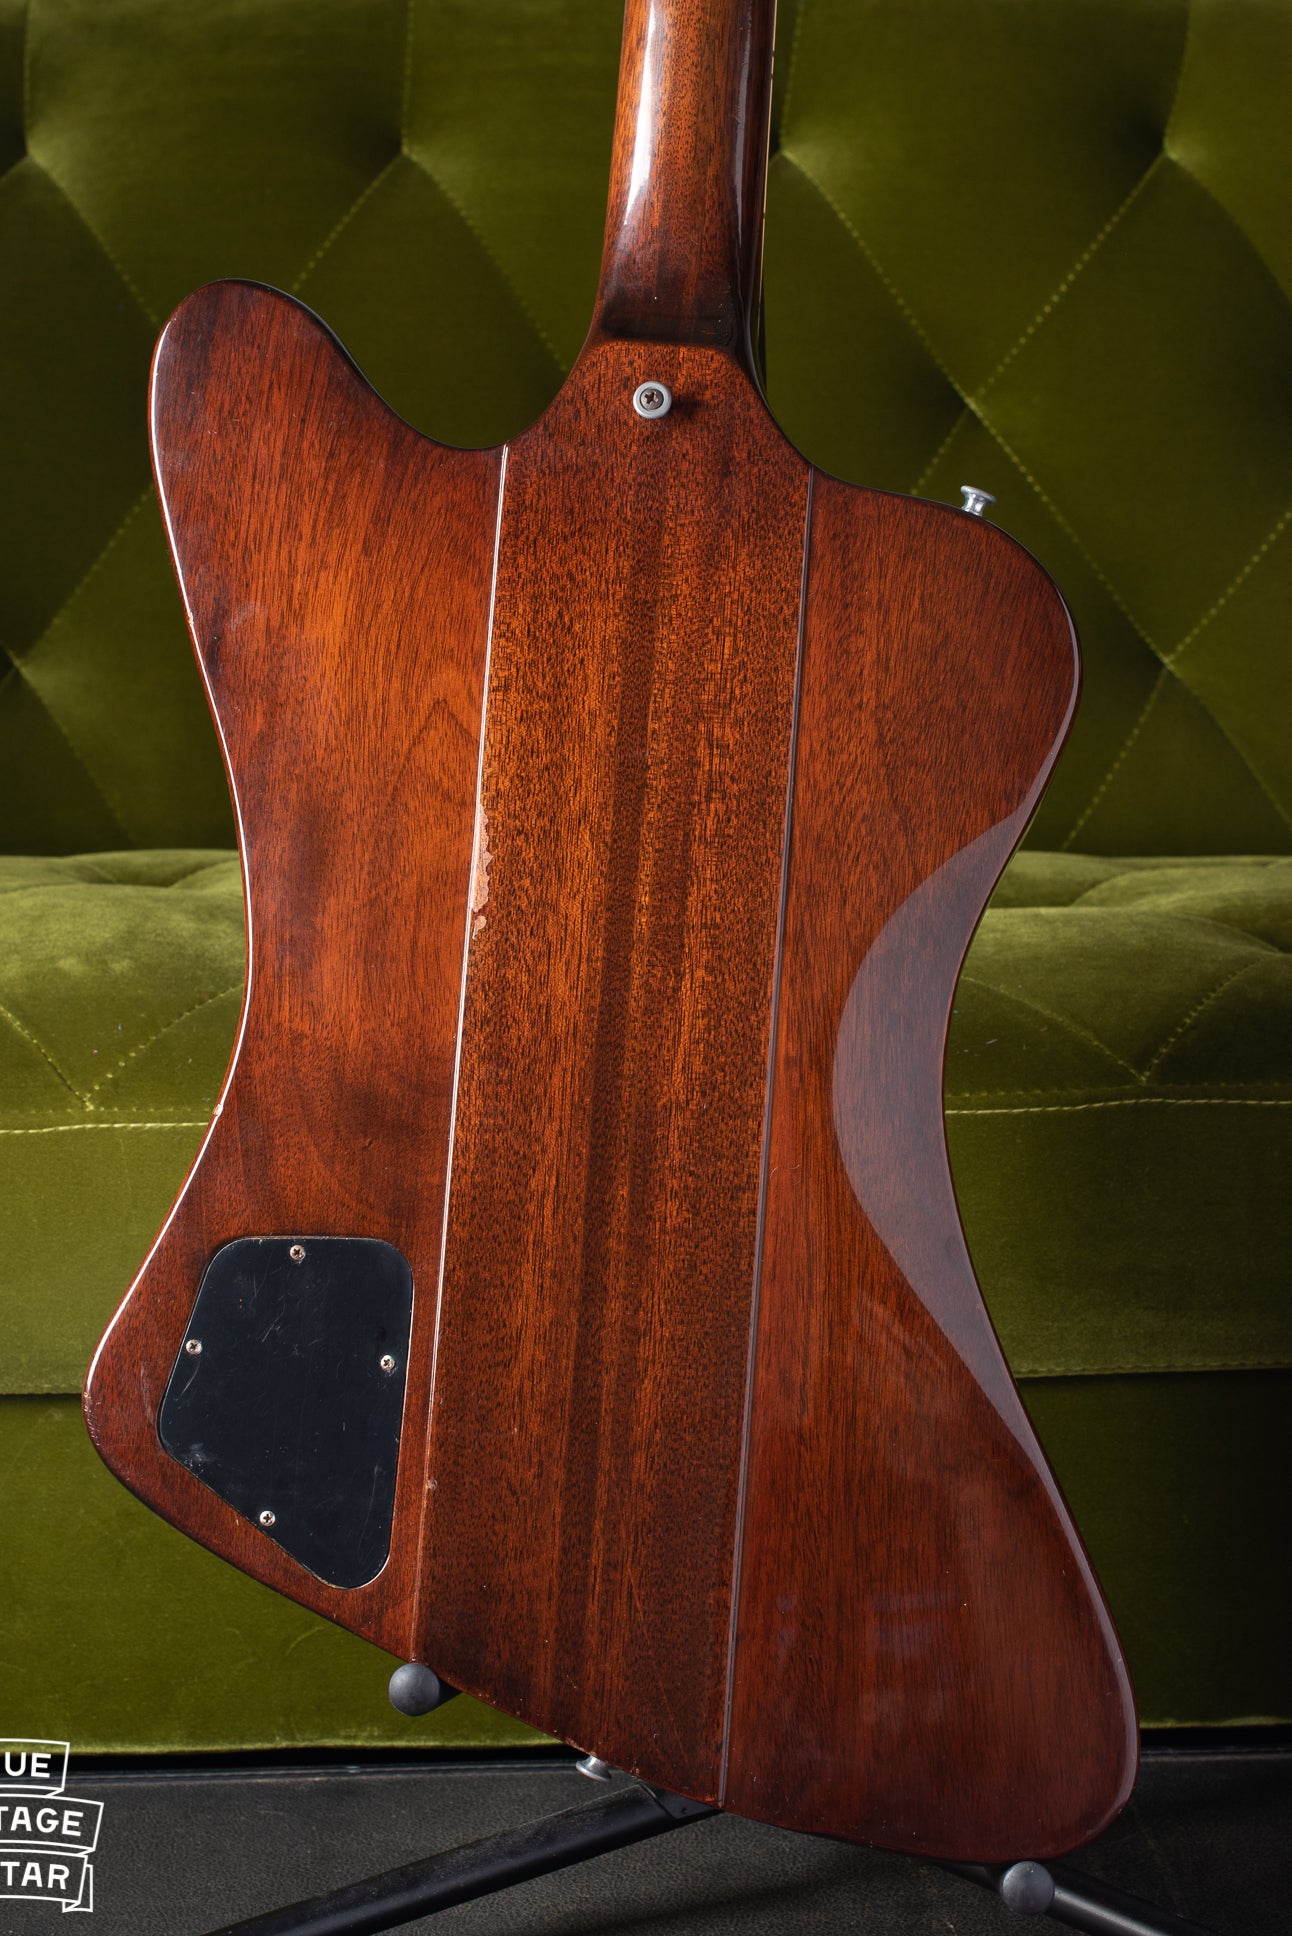 Back of body with neck through reverse body style of Gibson Firebird V 1964